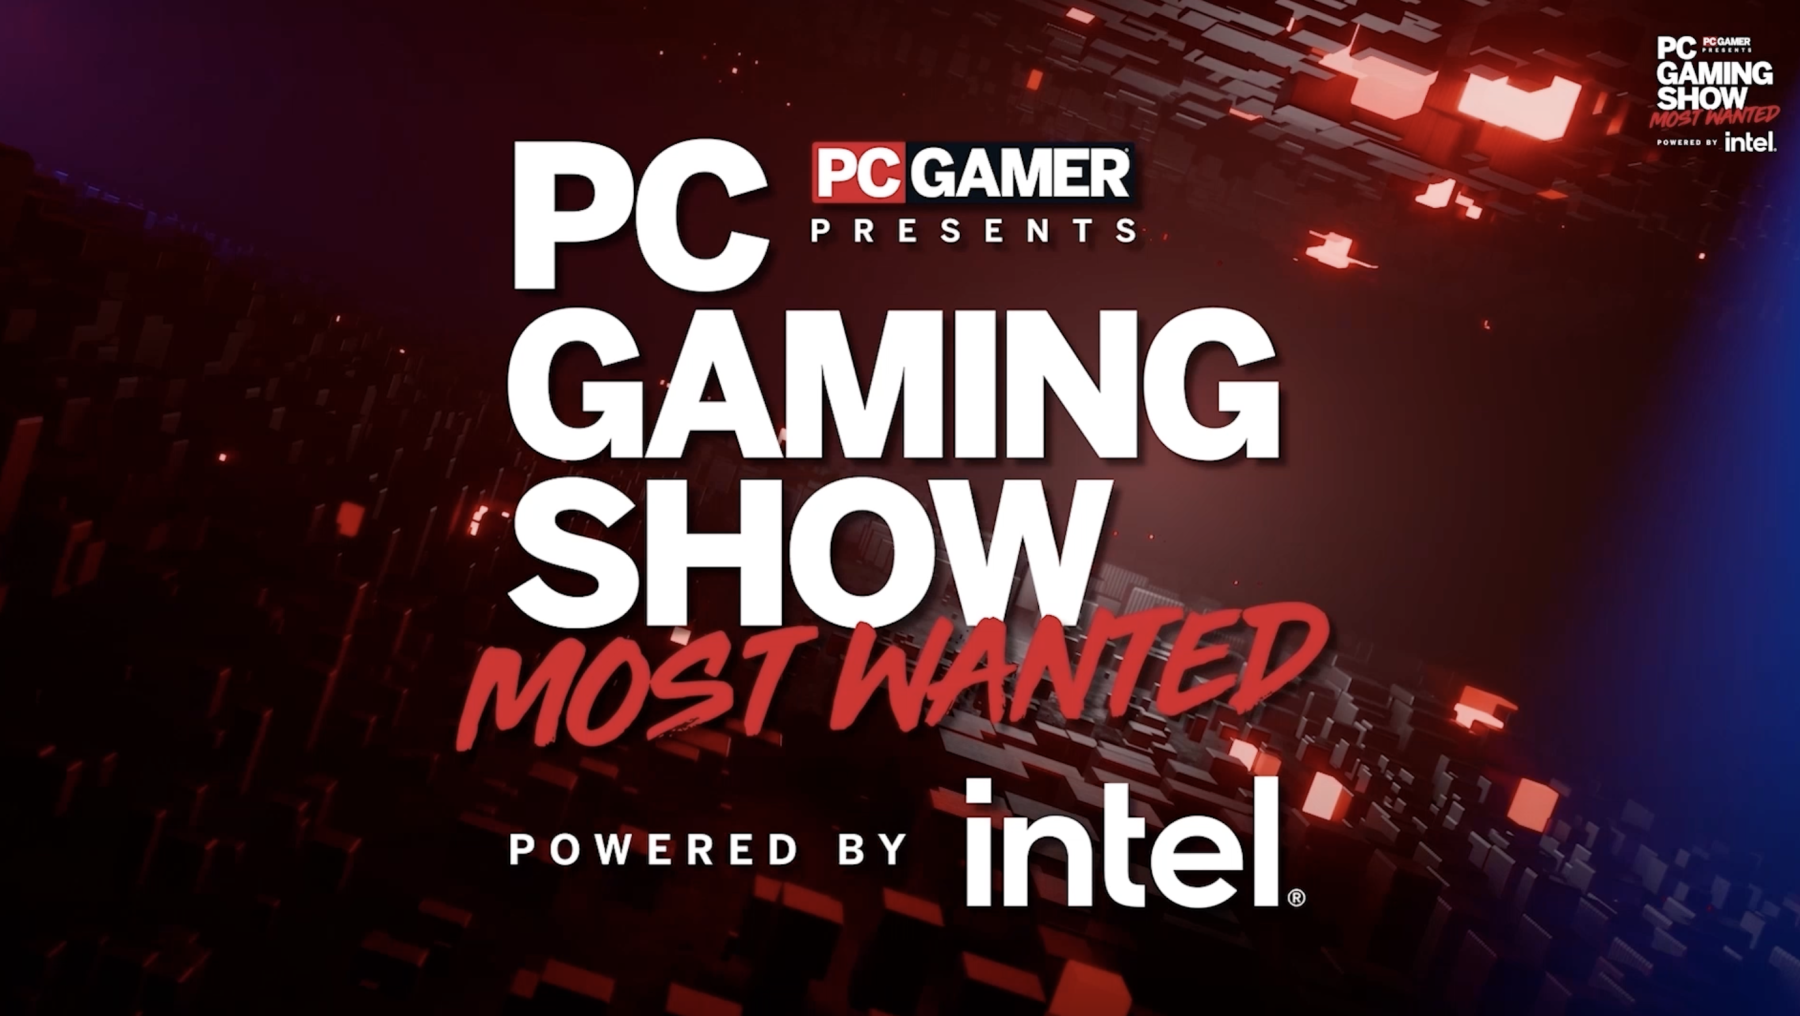 PC Gaming Show Most Wanted Poster